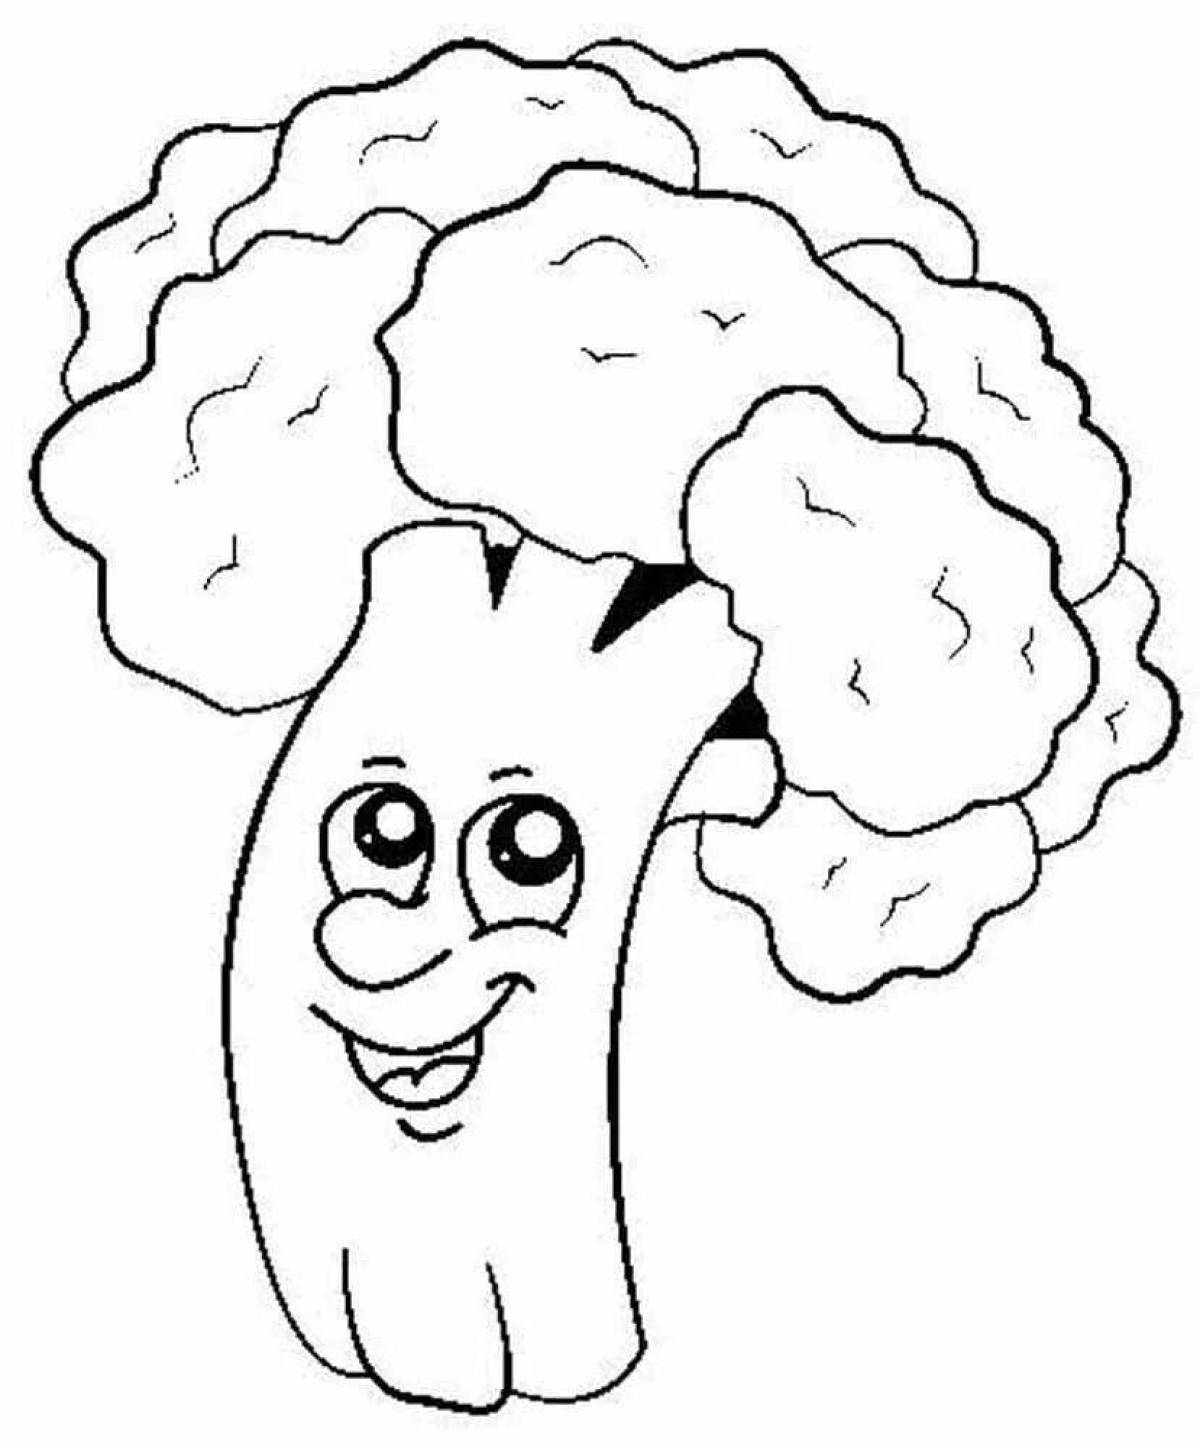 Witty broccoli coloring book